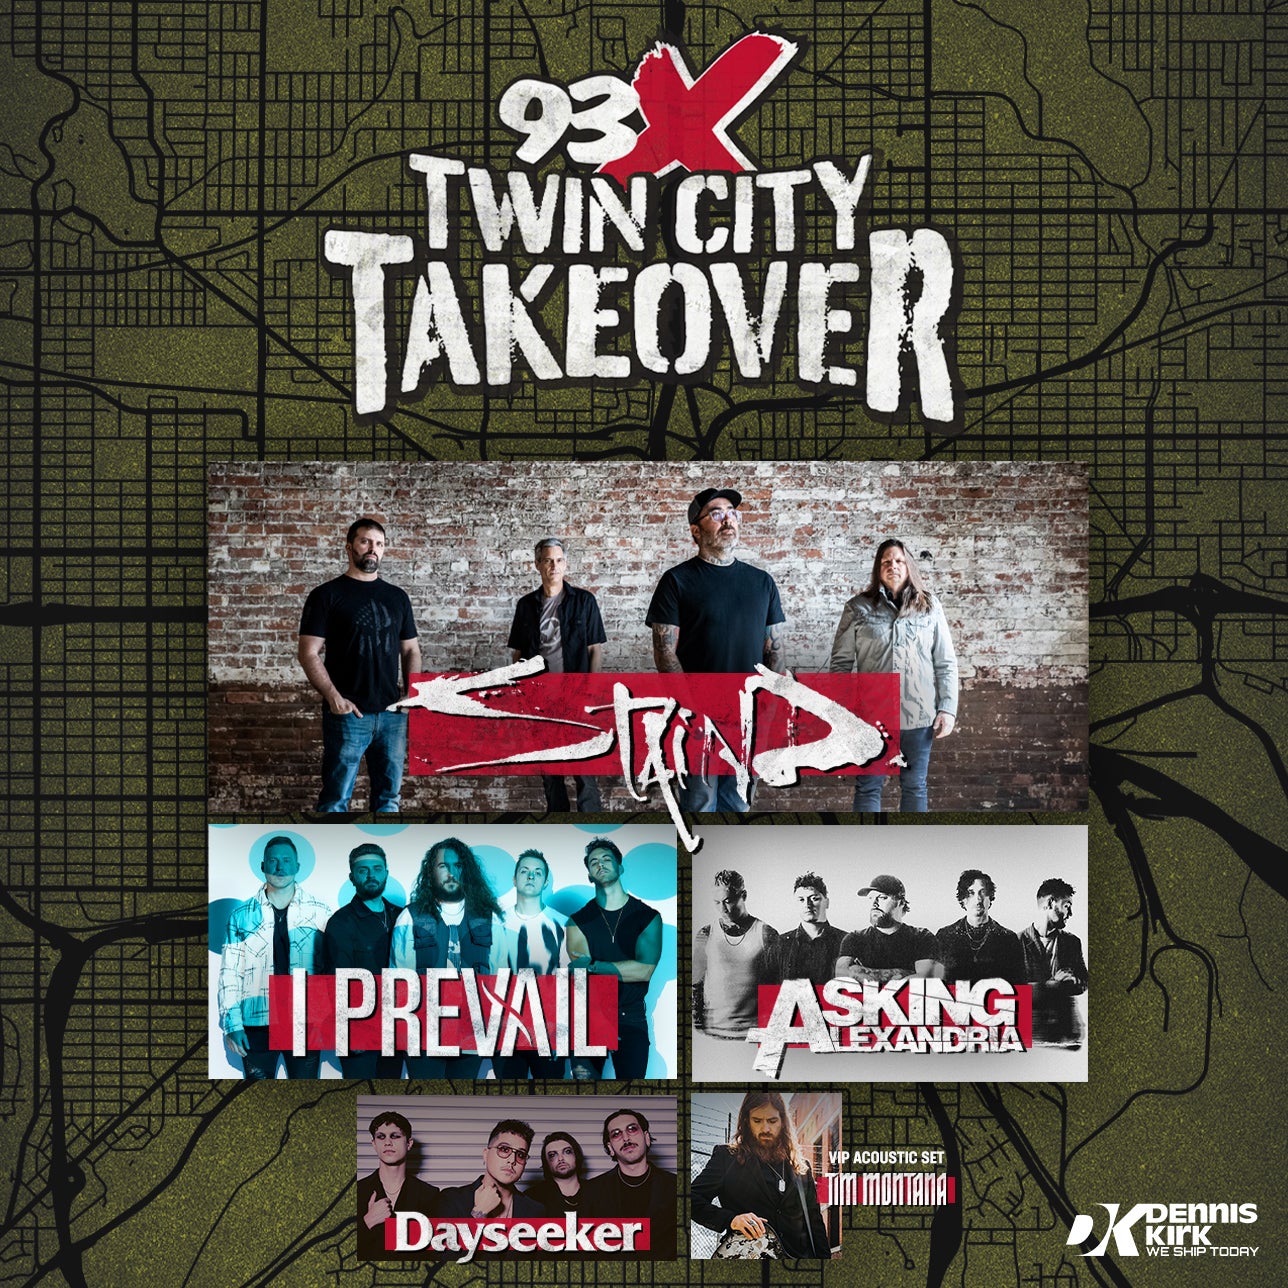 93X Twin City Takeover starring Staind